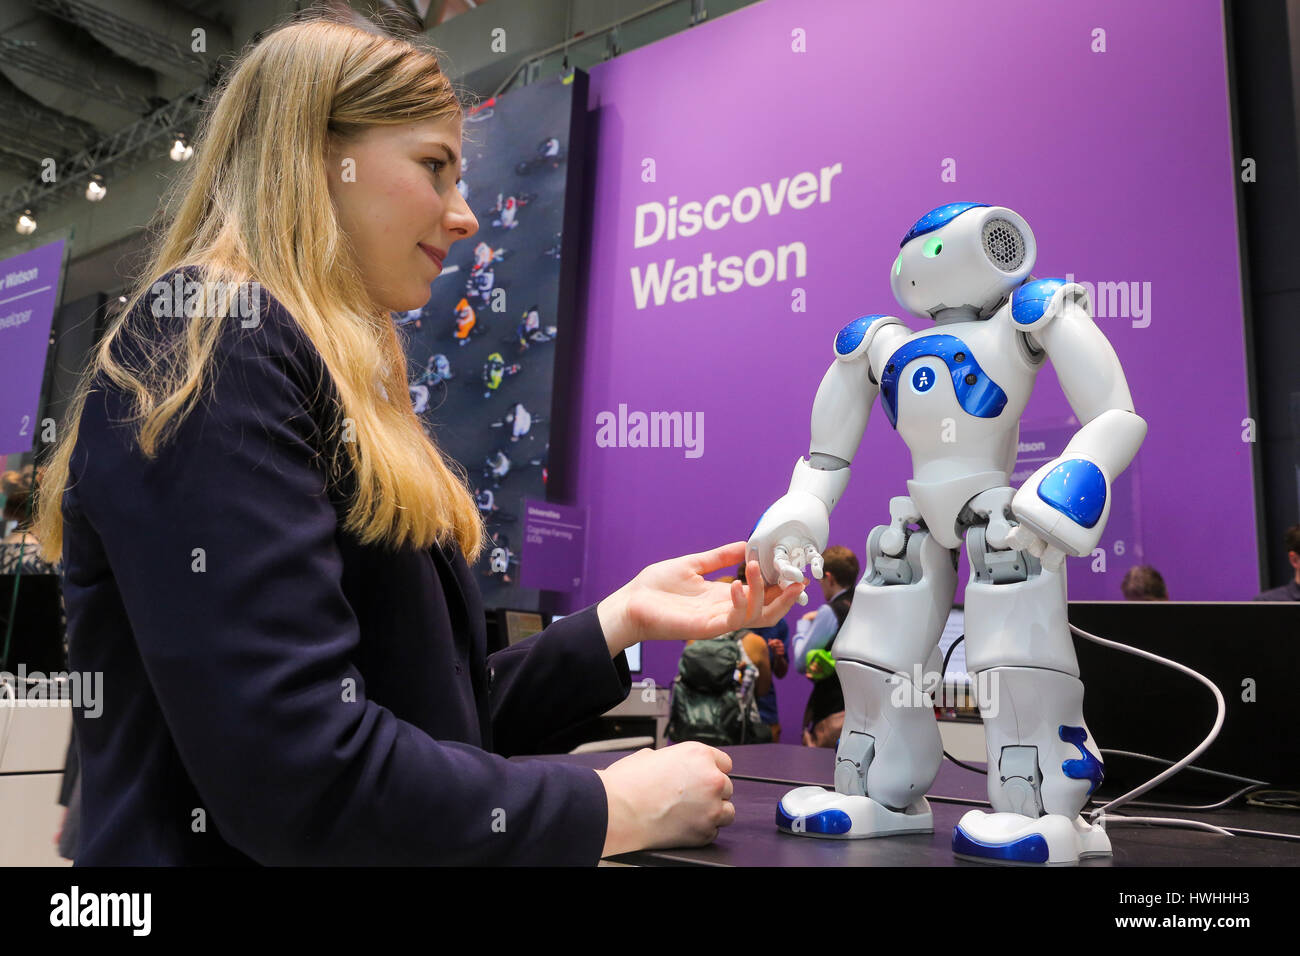 Hannover, Germany, 20th March 2017 - CeBIT digital technology trade fair. A stand hostess touches a humanoid NAO Watson robot at the IBM stand Stock Photo